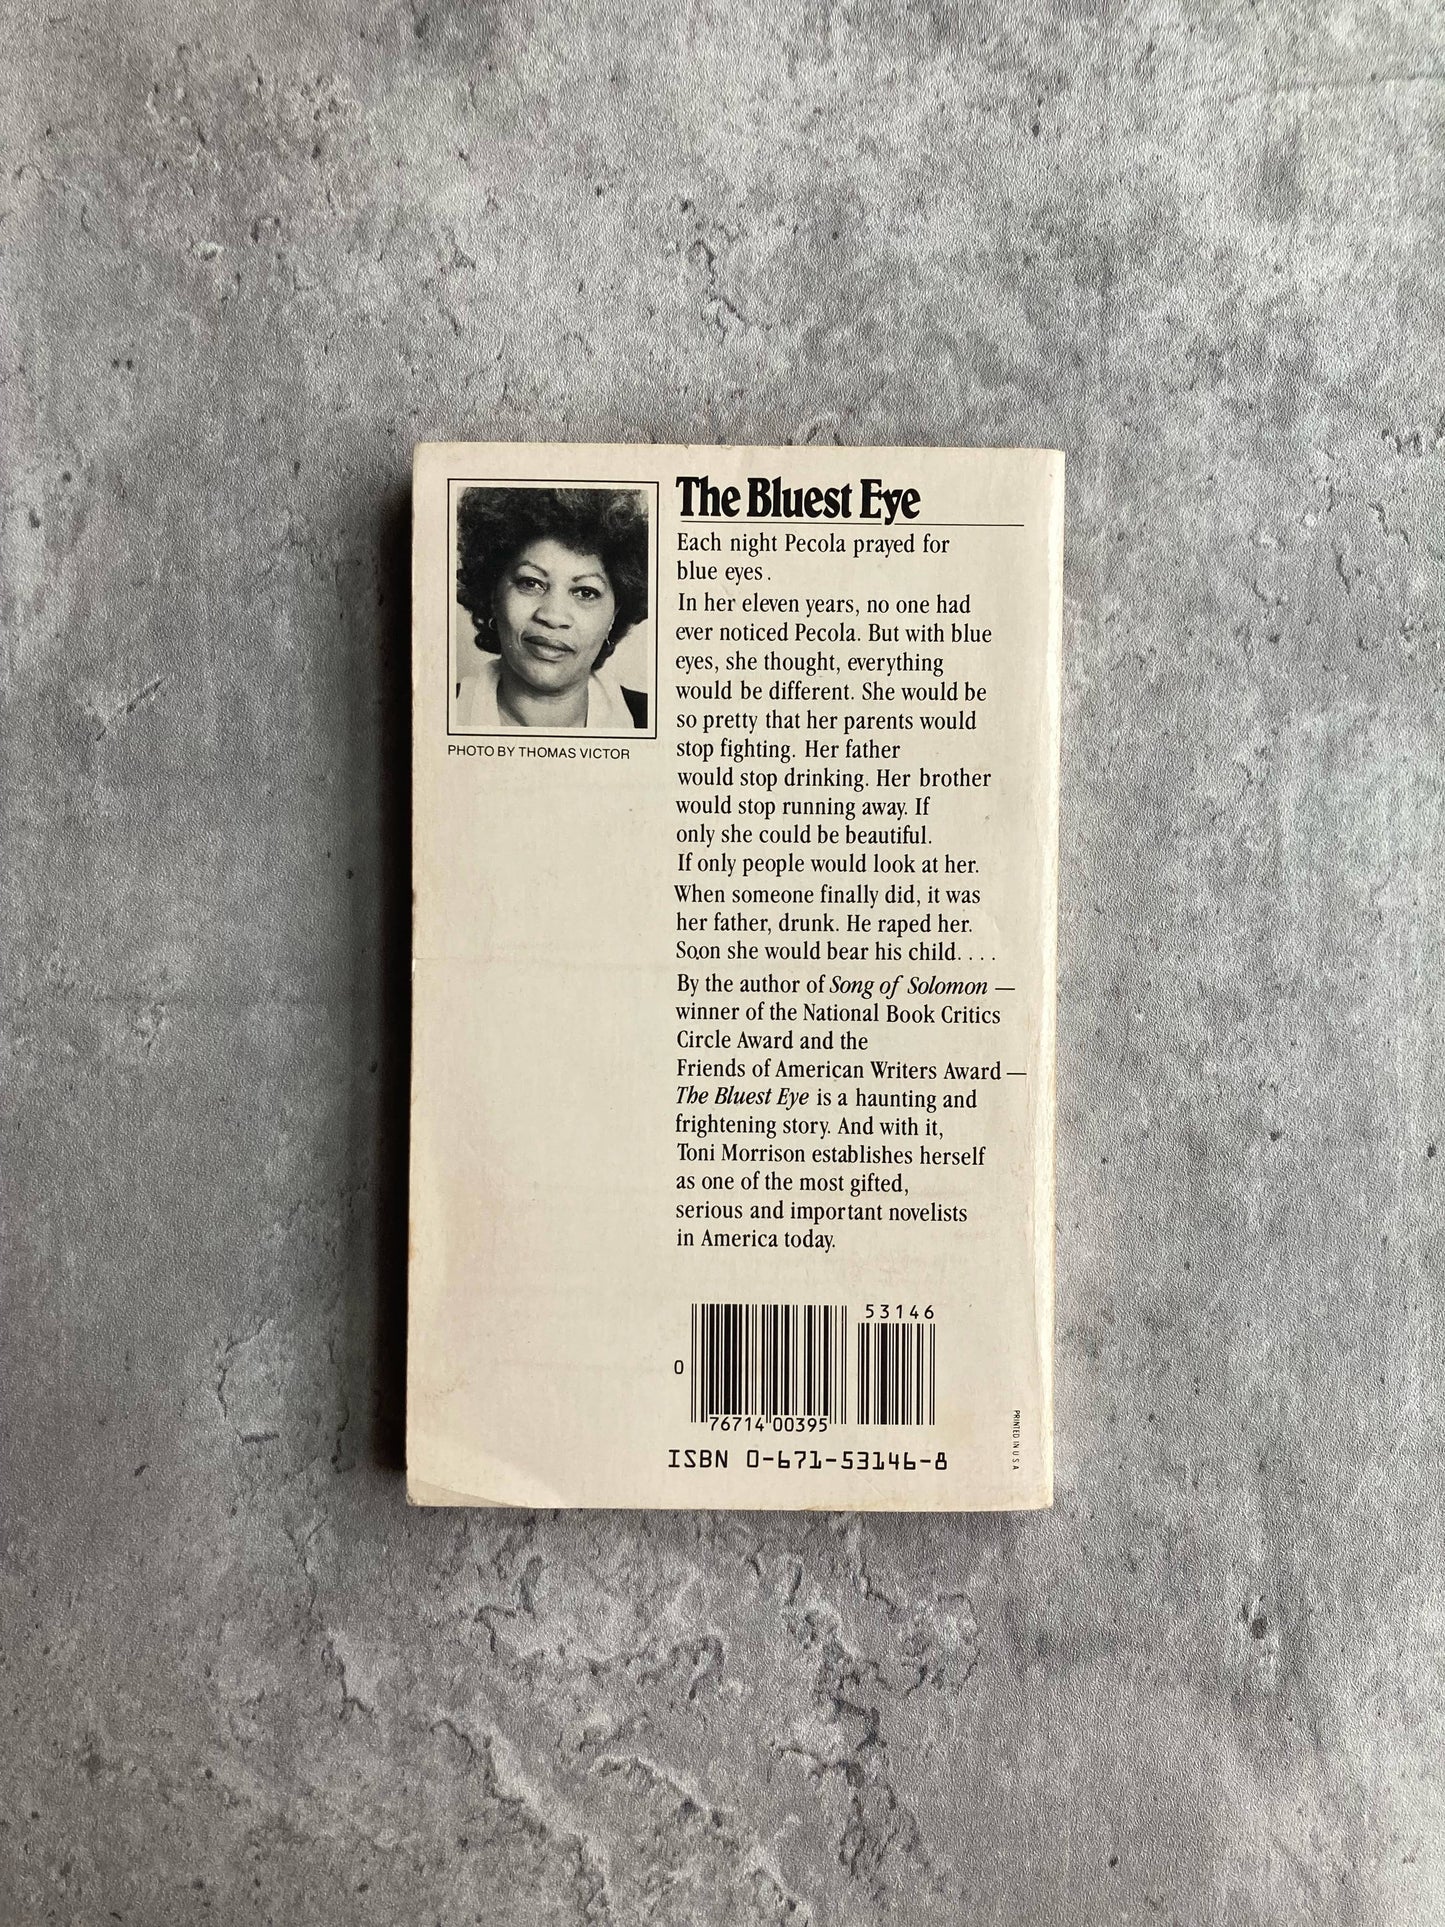  The Bluest Eye by Toni Morrison. Shop for new and used books with The Stone Circle, the only online bookstore near you in Los Angeles, California.